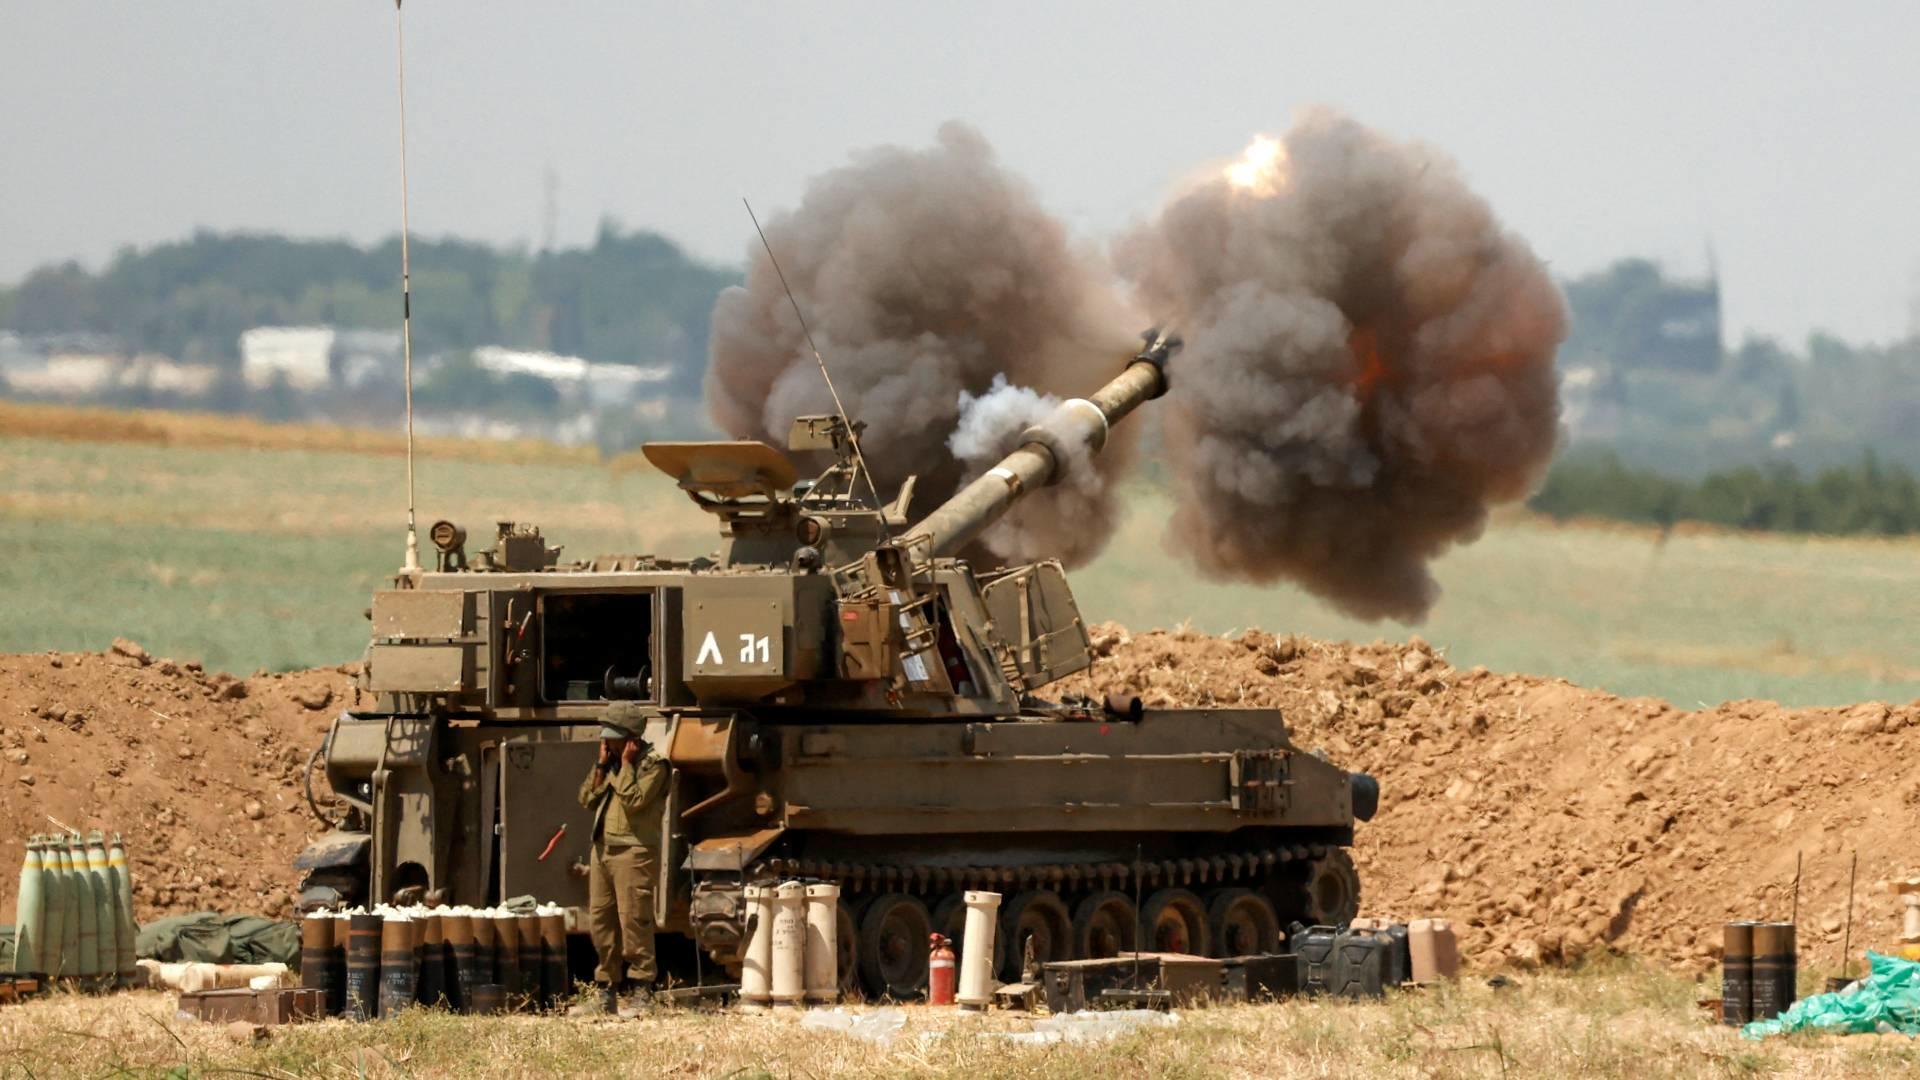 An Israeli 155mm self-propelled howitzer fires artillery shells towards the Gaza Strip on 20 May 2021.